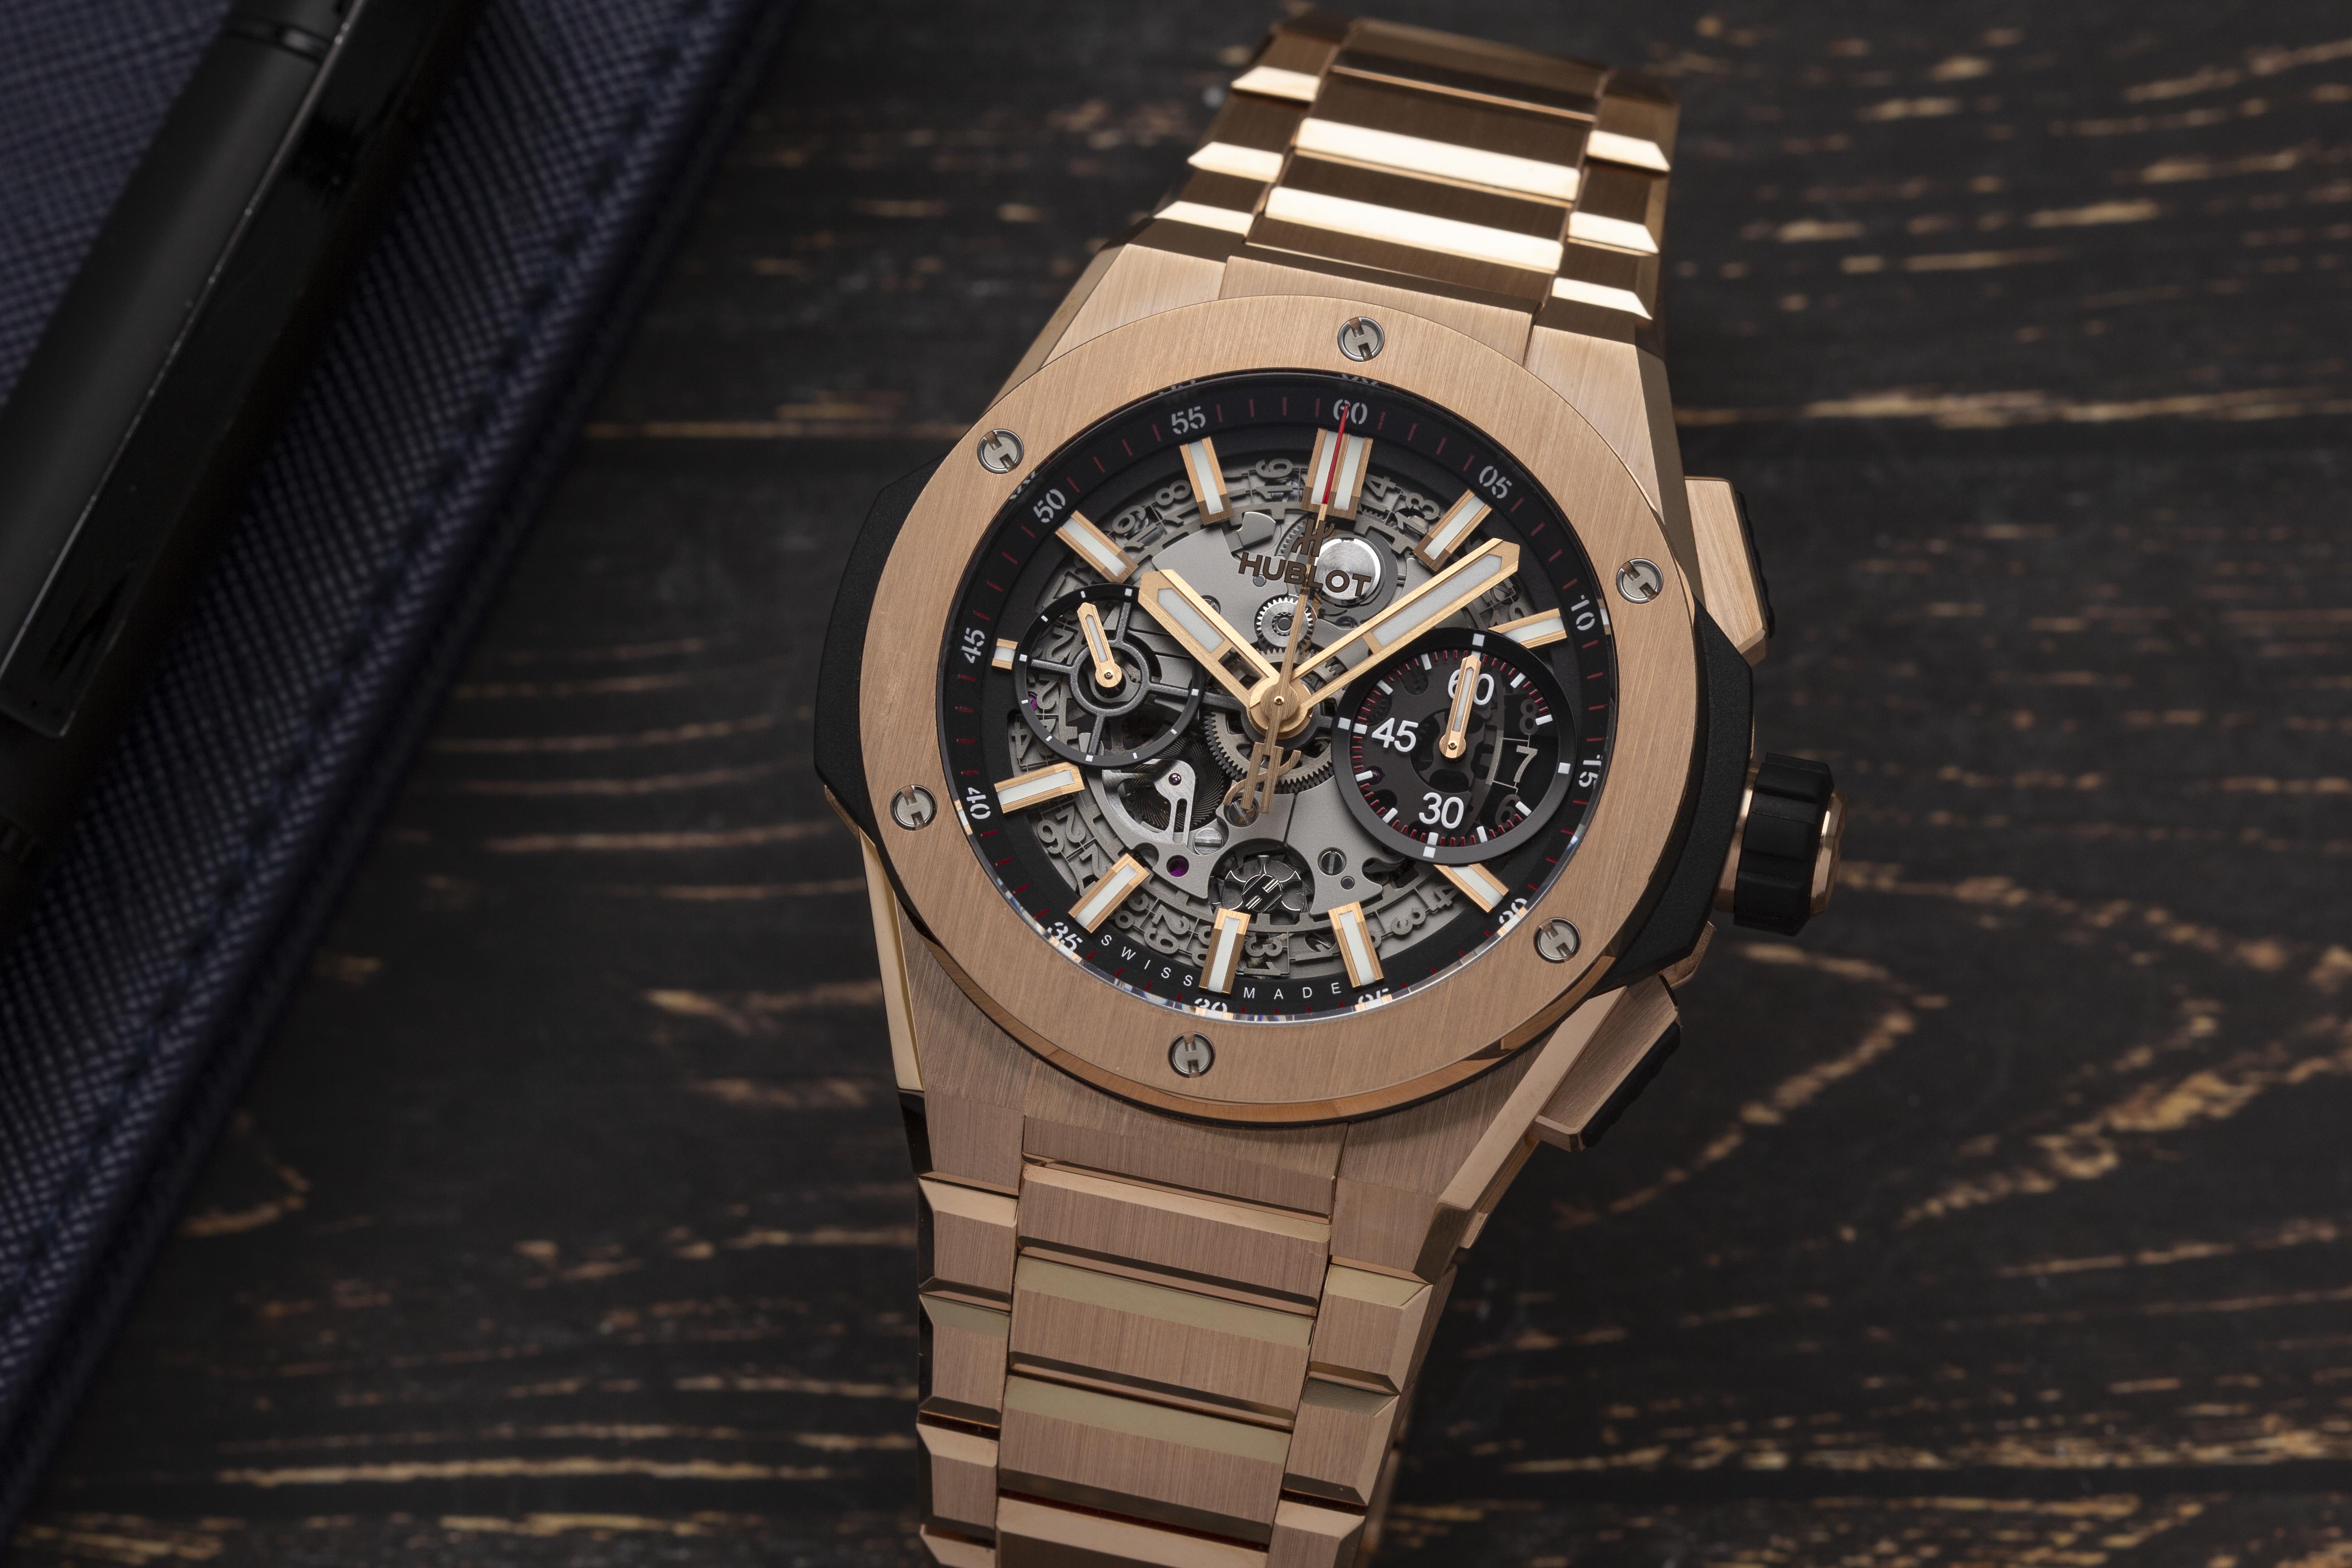 A WEEK ON THE WRIST: The Hublot Big Bang Integral King Gold is a